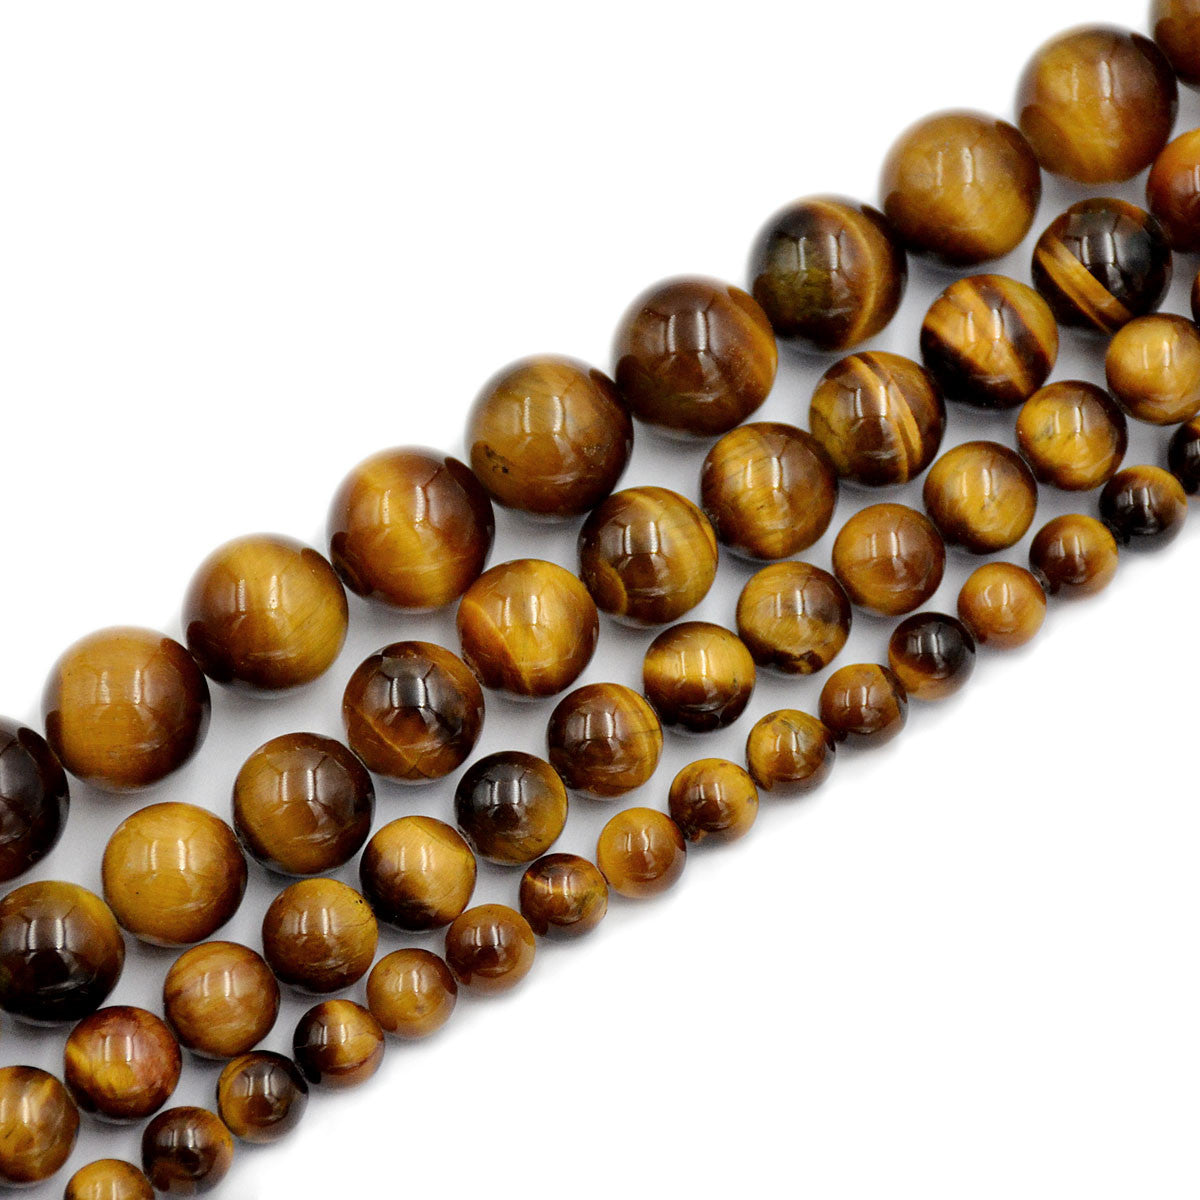 Large Hole Tigers Eye Beads | Tiger Eye Smooth Round Shaped Beads with 2mm  Holes | 7.5 Strand | 8mm 10mm 12mm Available | Loose Beads - 8mm